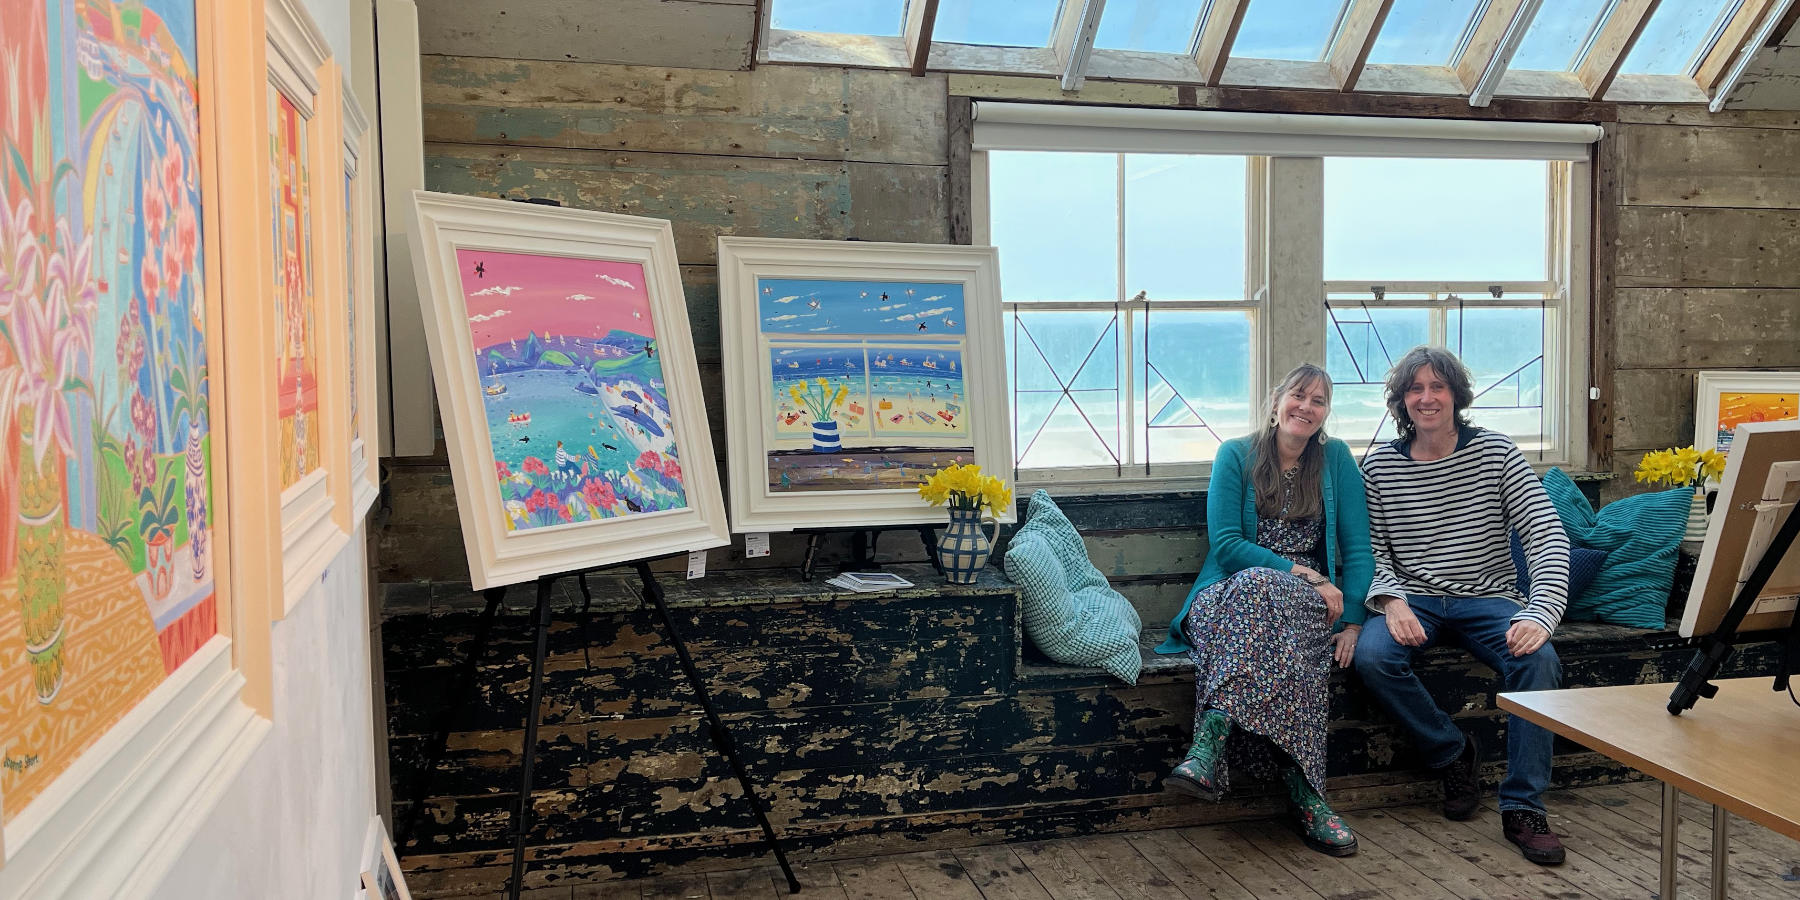 Cornish artists Joanne Short and John Dyer pictured at their exhibition in The Porthmeor Studios in St Ives in Cornwall